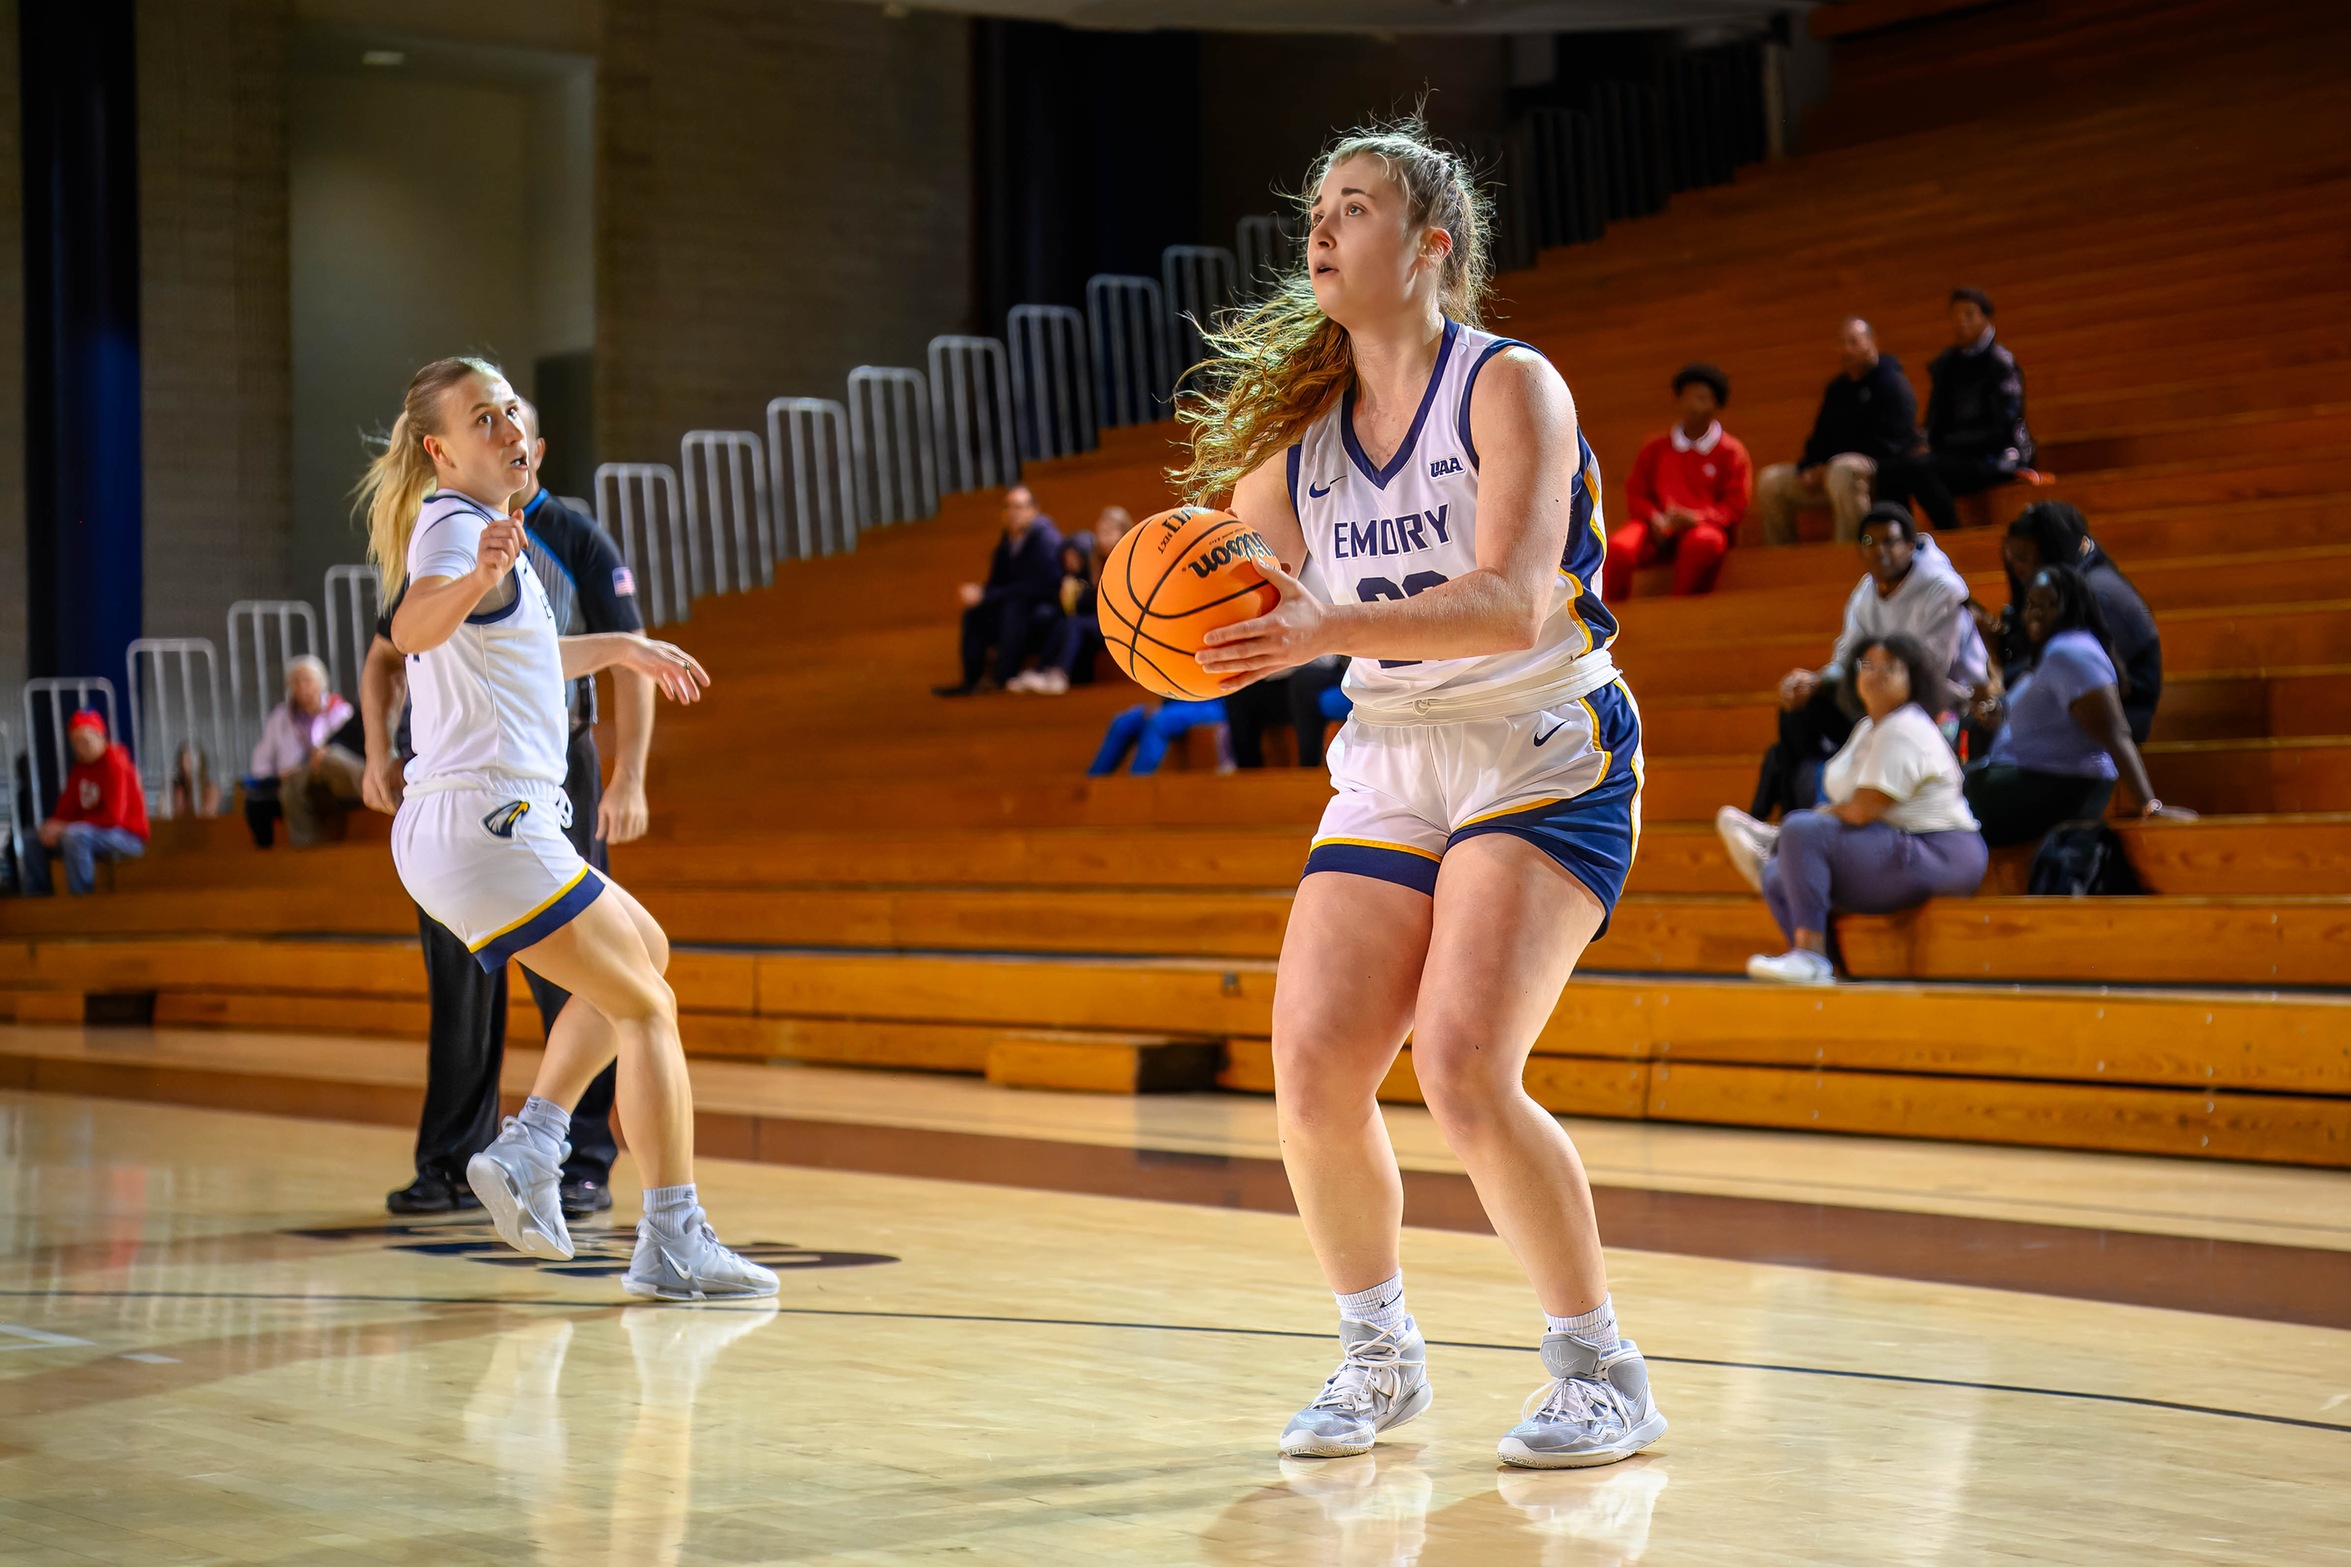 Laudick Double-Double Leads Women’s Basketball to Road Win over Piedmont, 69-54